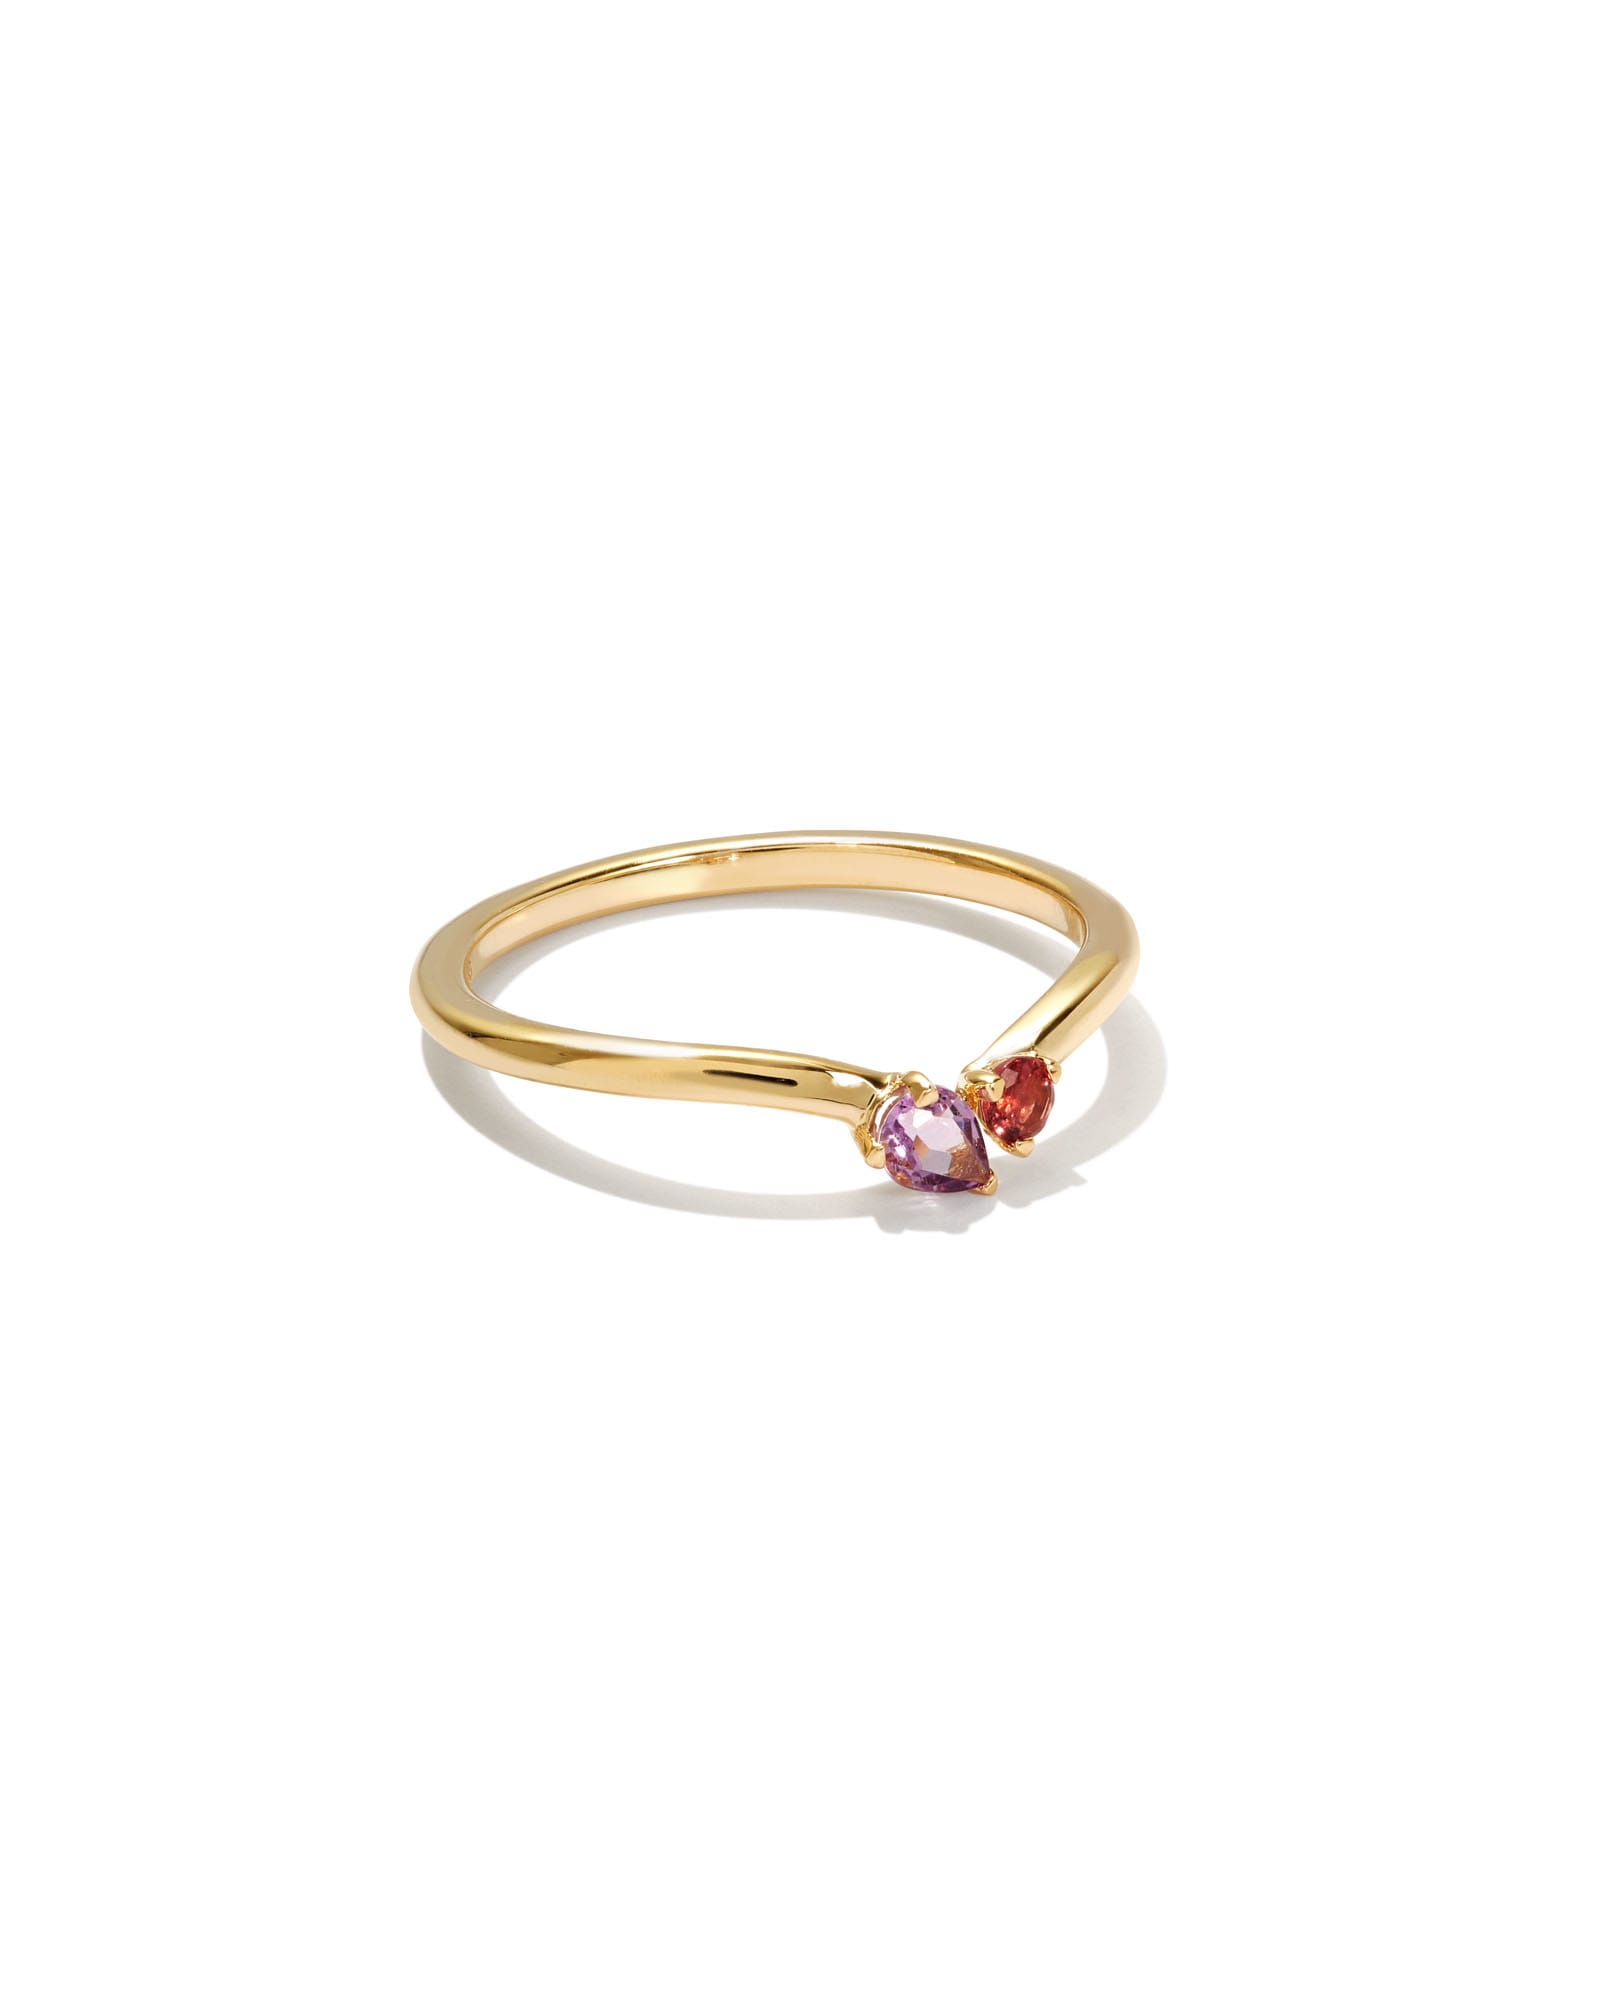 Toi et Moi 14k Yellow Gold Band Ring White Sapphire and Pearl